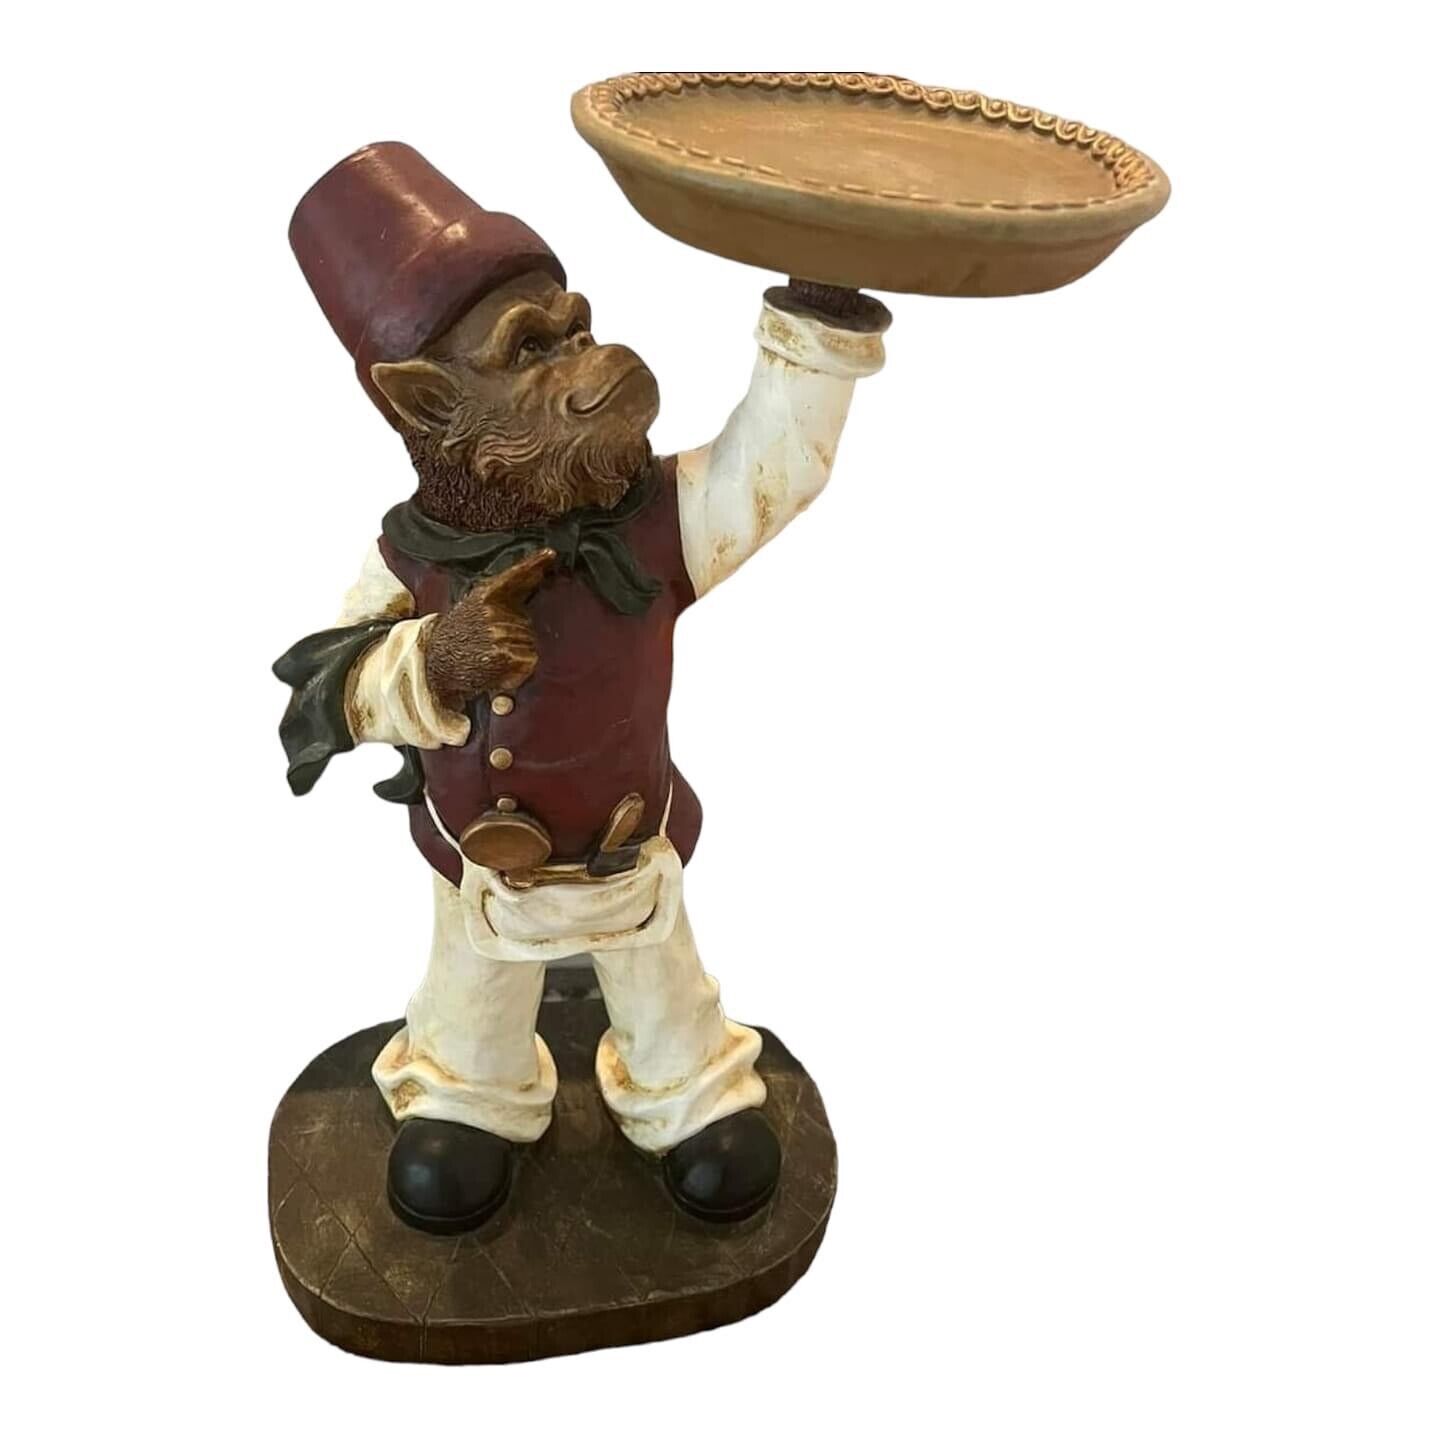 Monkey Chef Statue Kitchen Butler Platter Decor Server 15 Inches Display Quirky